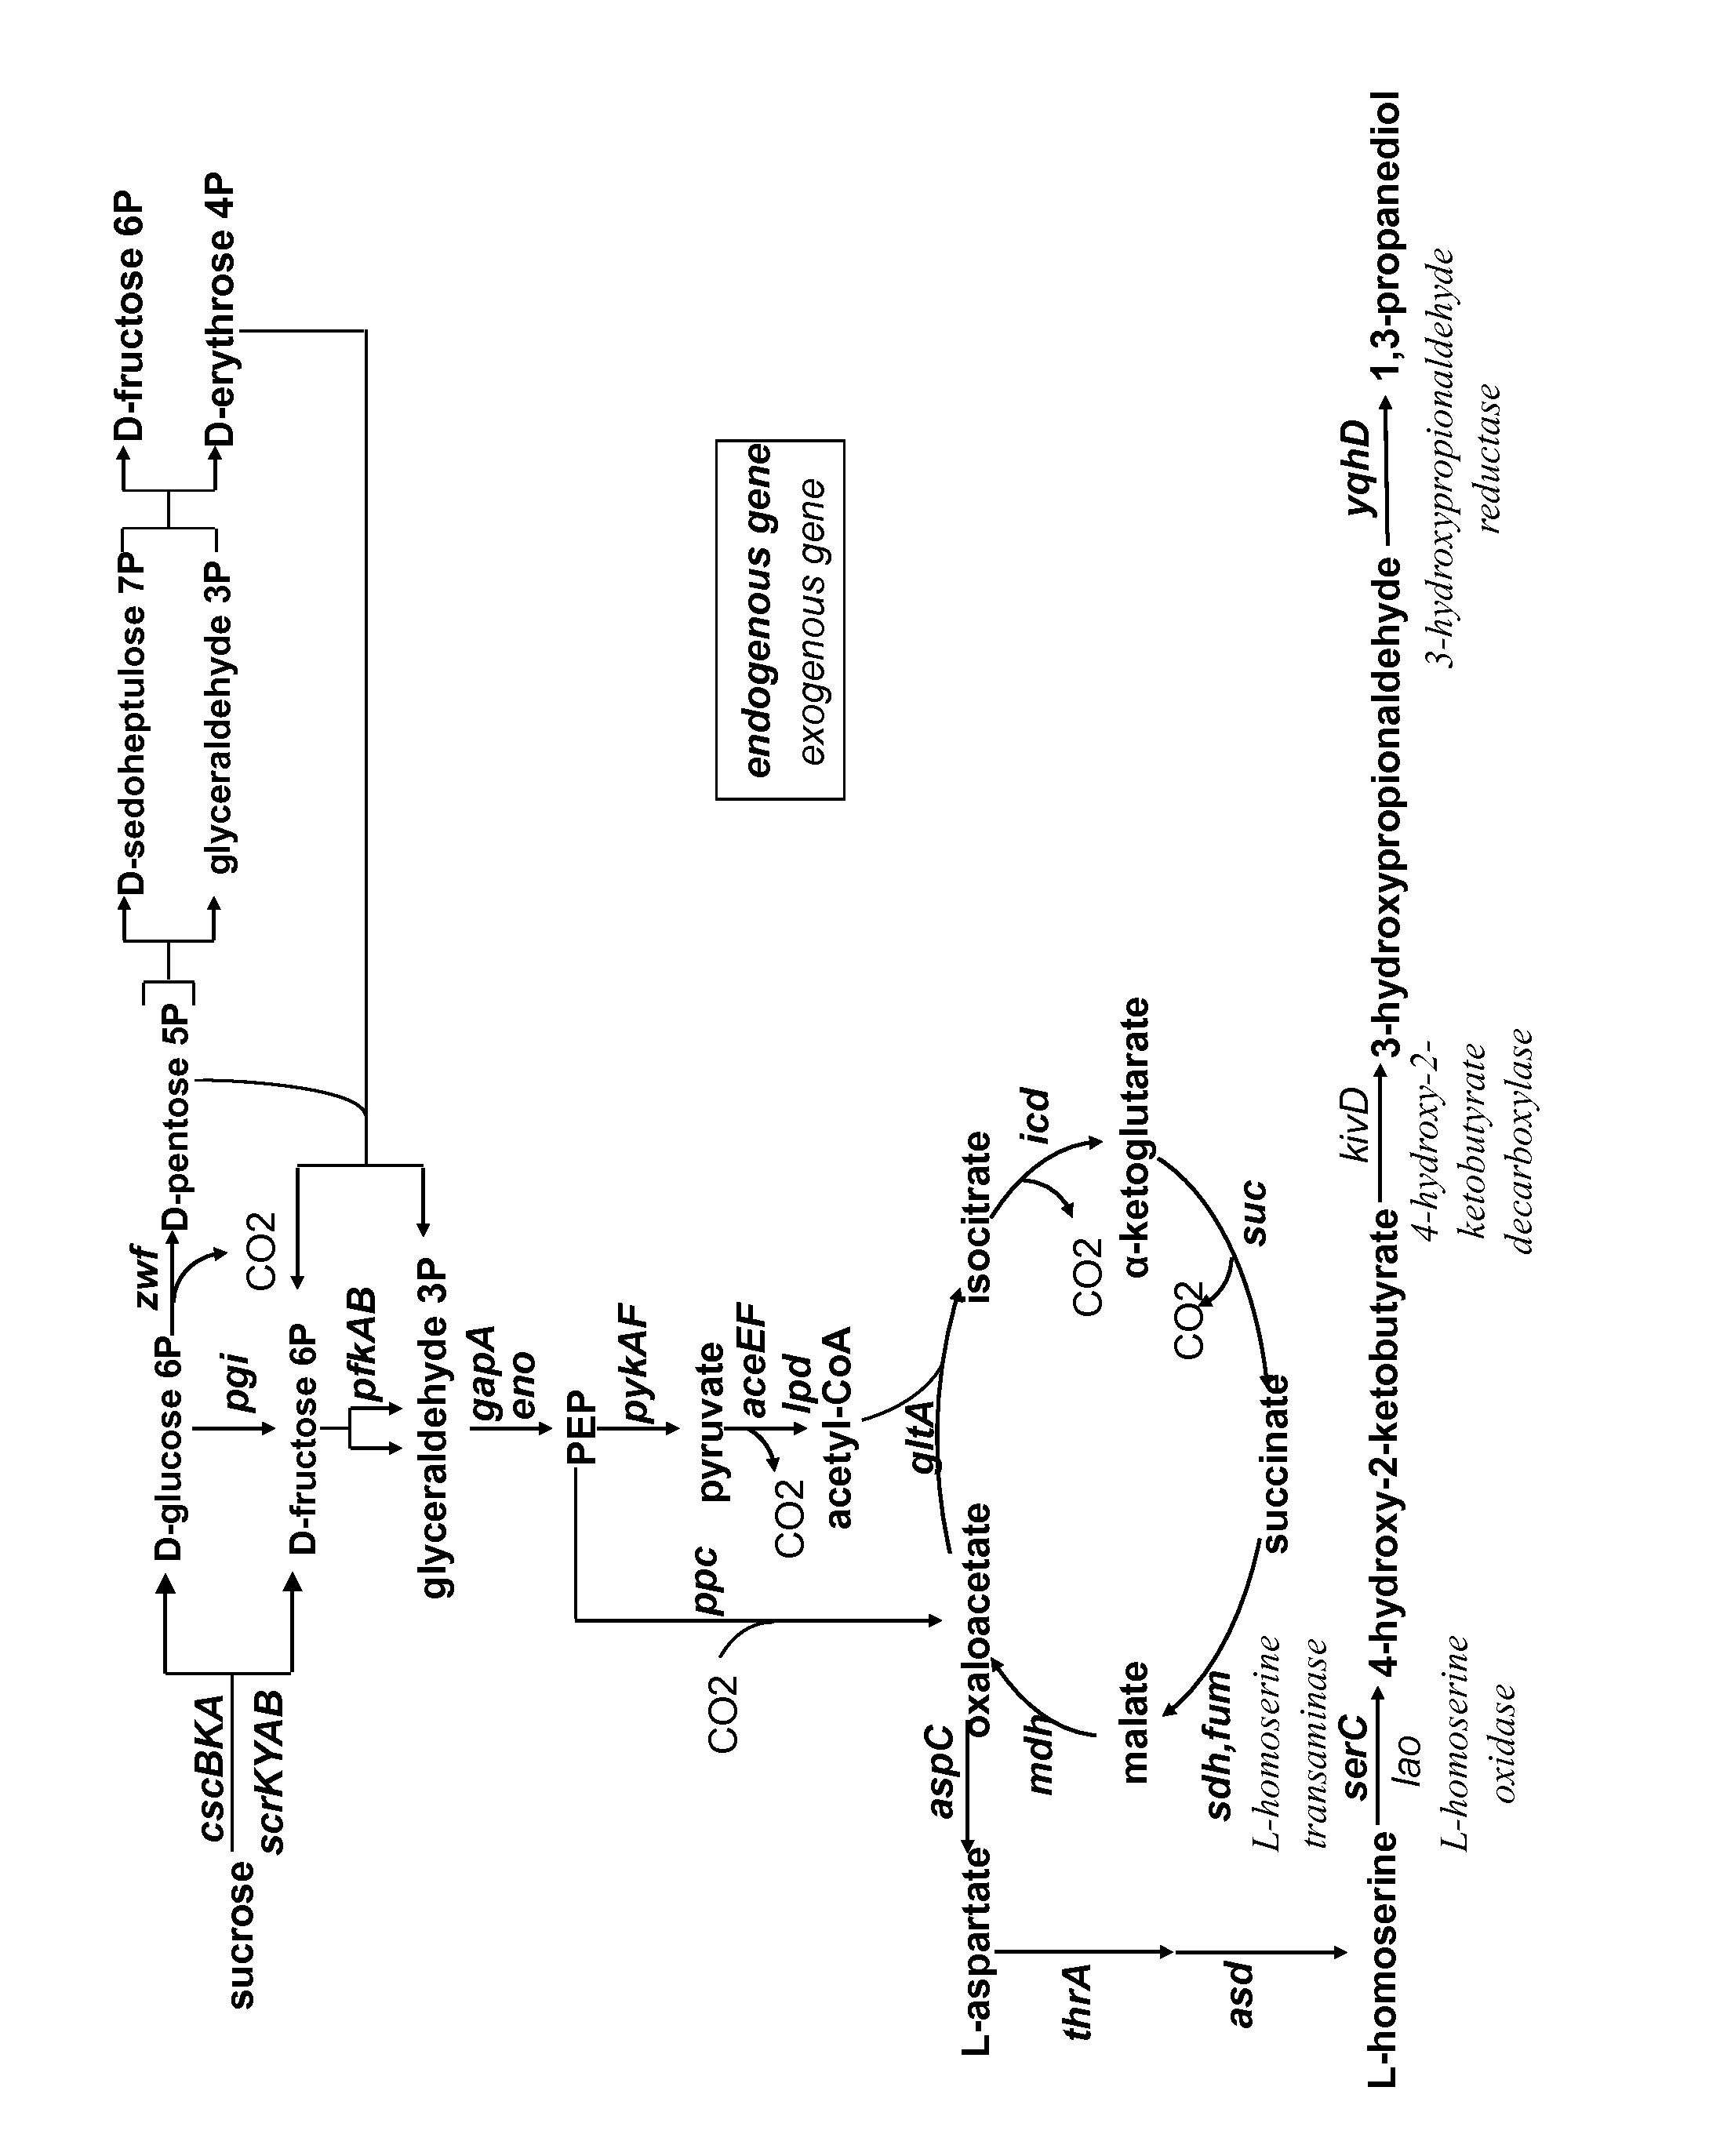 Method for the preparation of 1,3-propanediol from sucrose